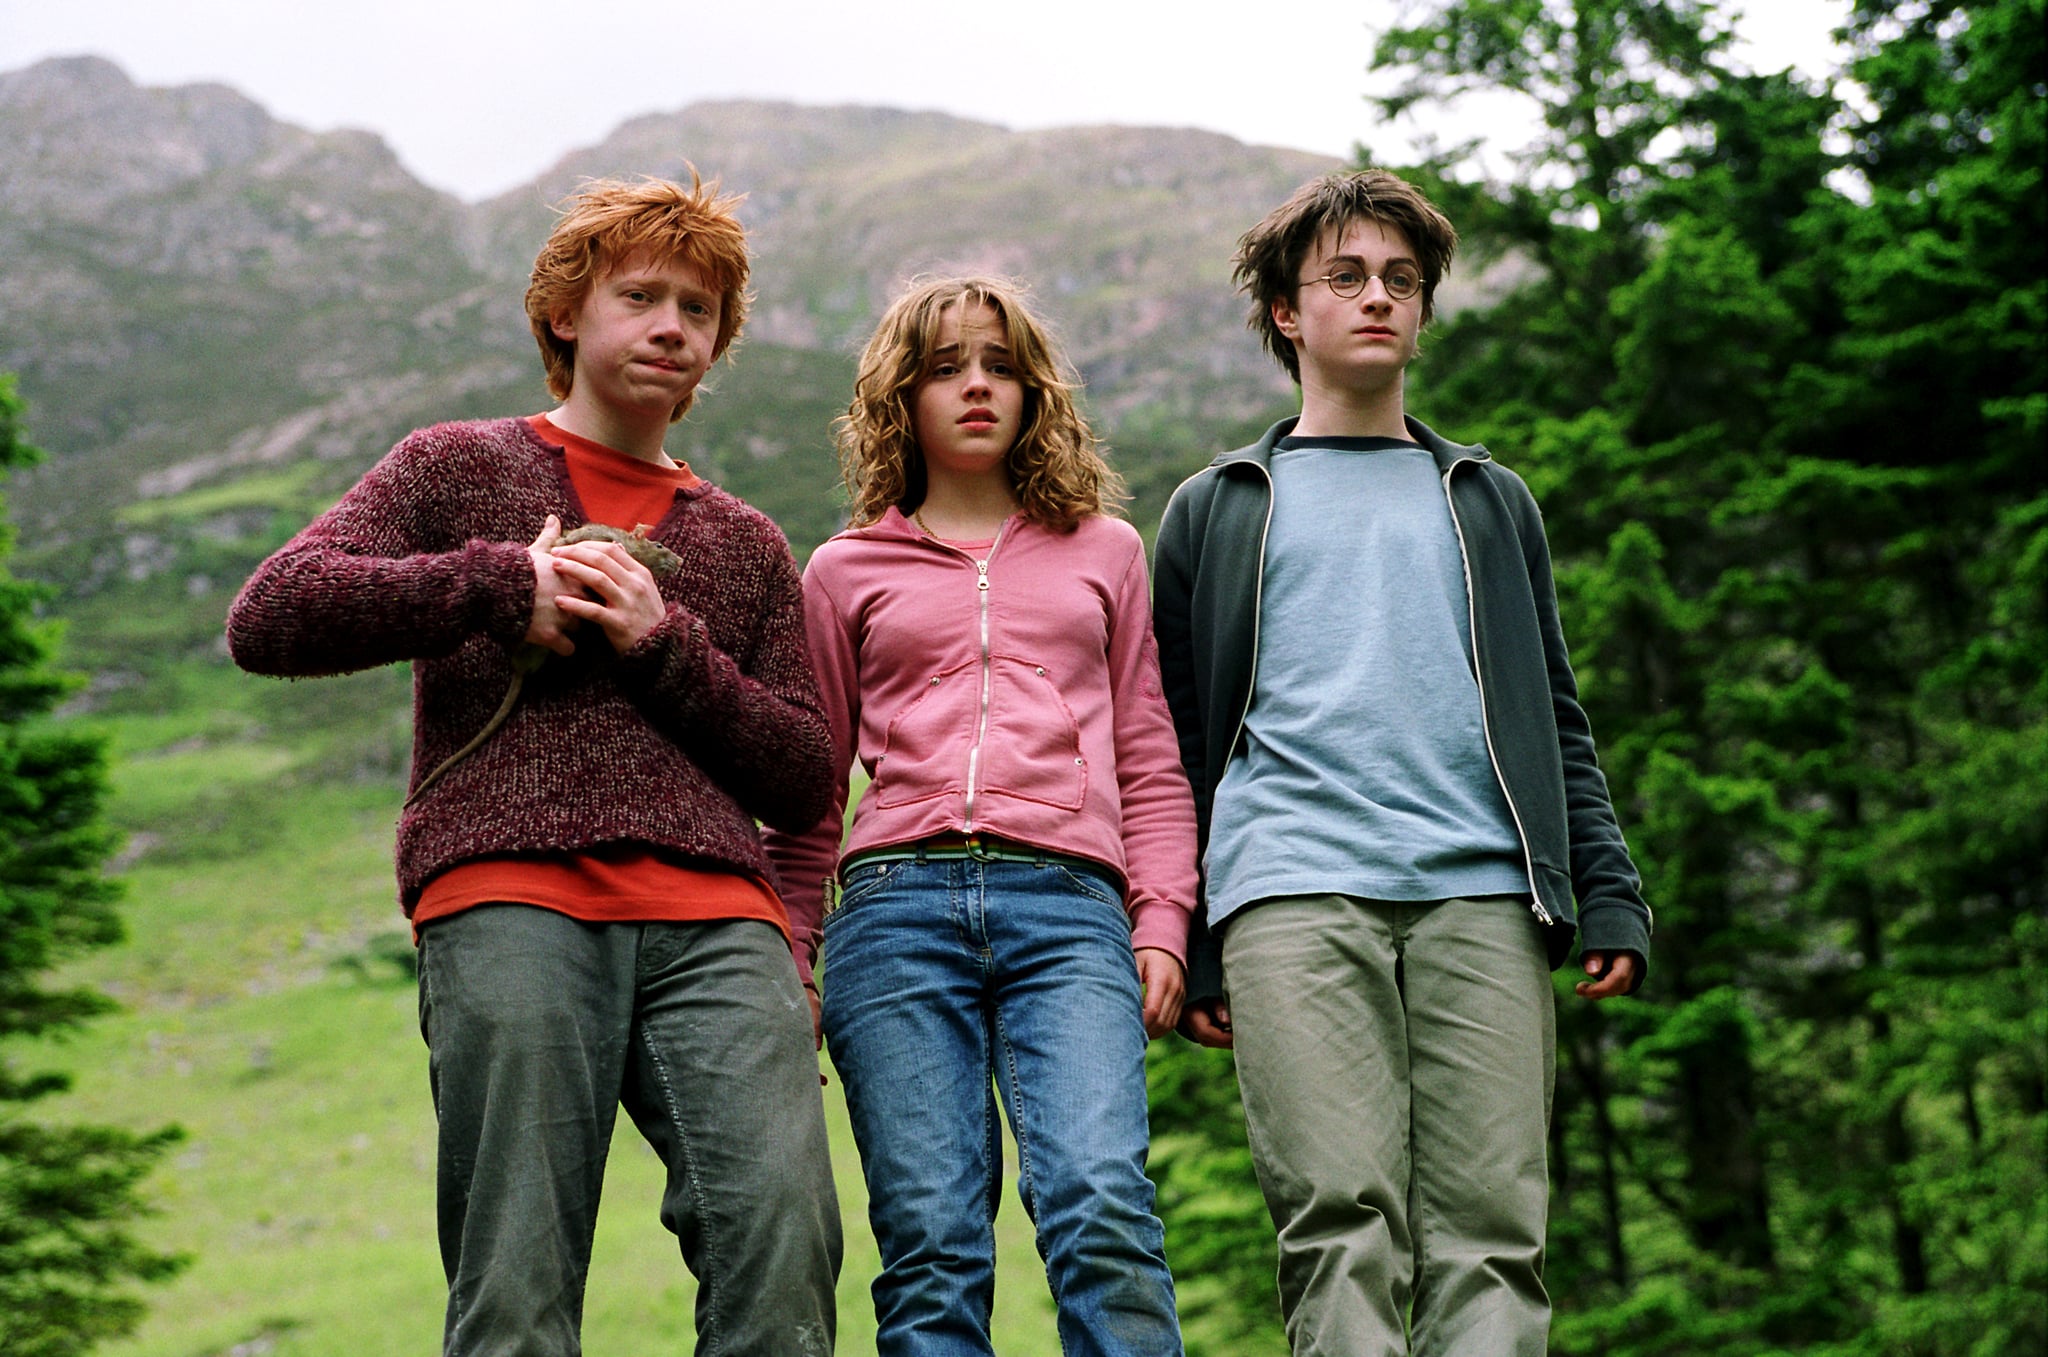 HARRY POTTER AND THE PRISONER OF AZKABAN, Rupert Grint (holding 'Scabbers' the rat), Emma Watson, Daniel Radcliffe, 2004,  Warner Brothers/courtesy Everett Collection